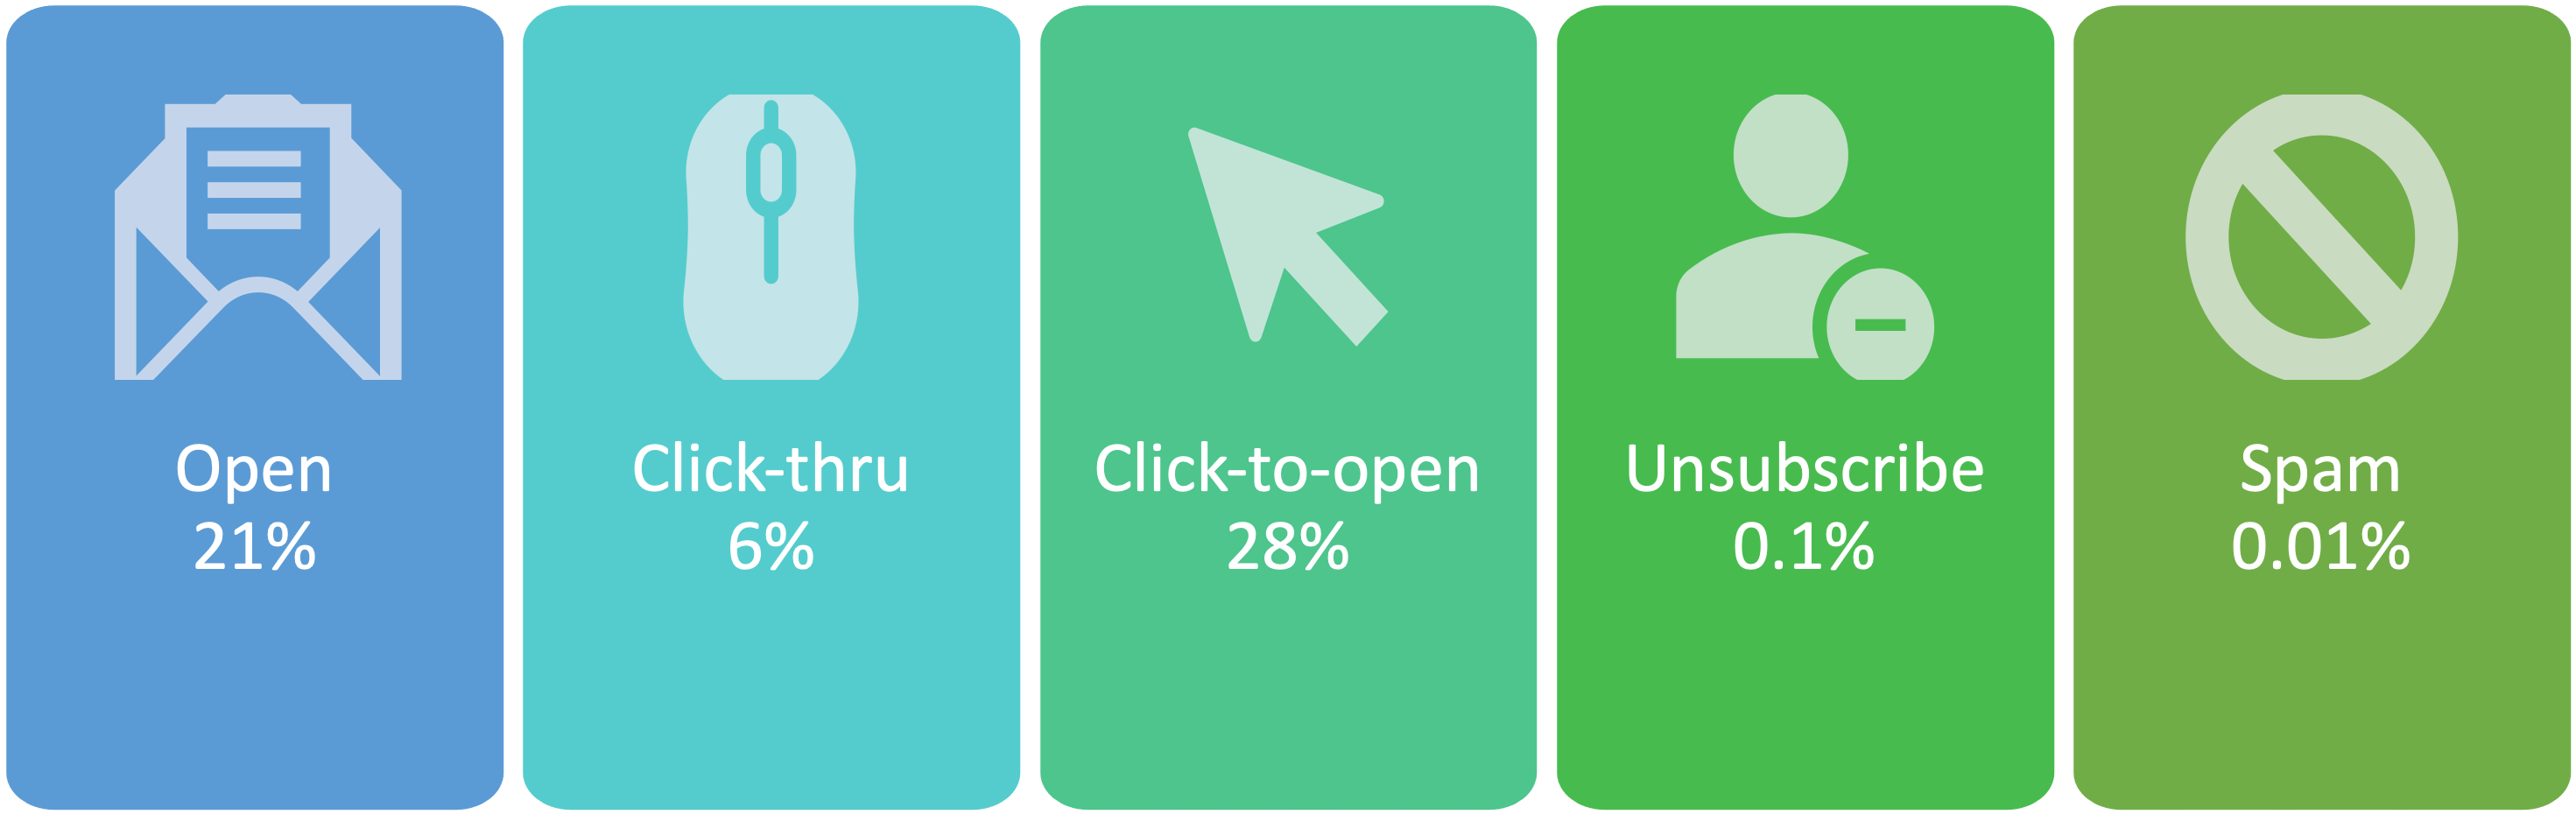 Average Email Statistics Canada: open 21%, click 6%, unsubscribe 0.1%, spam 0.01%